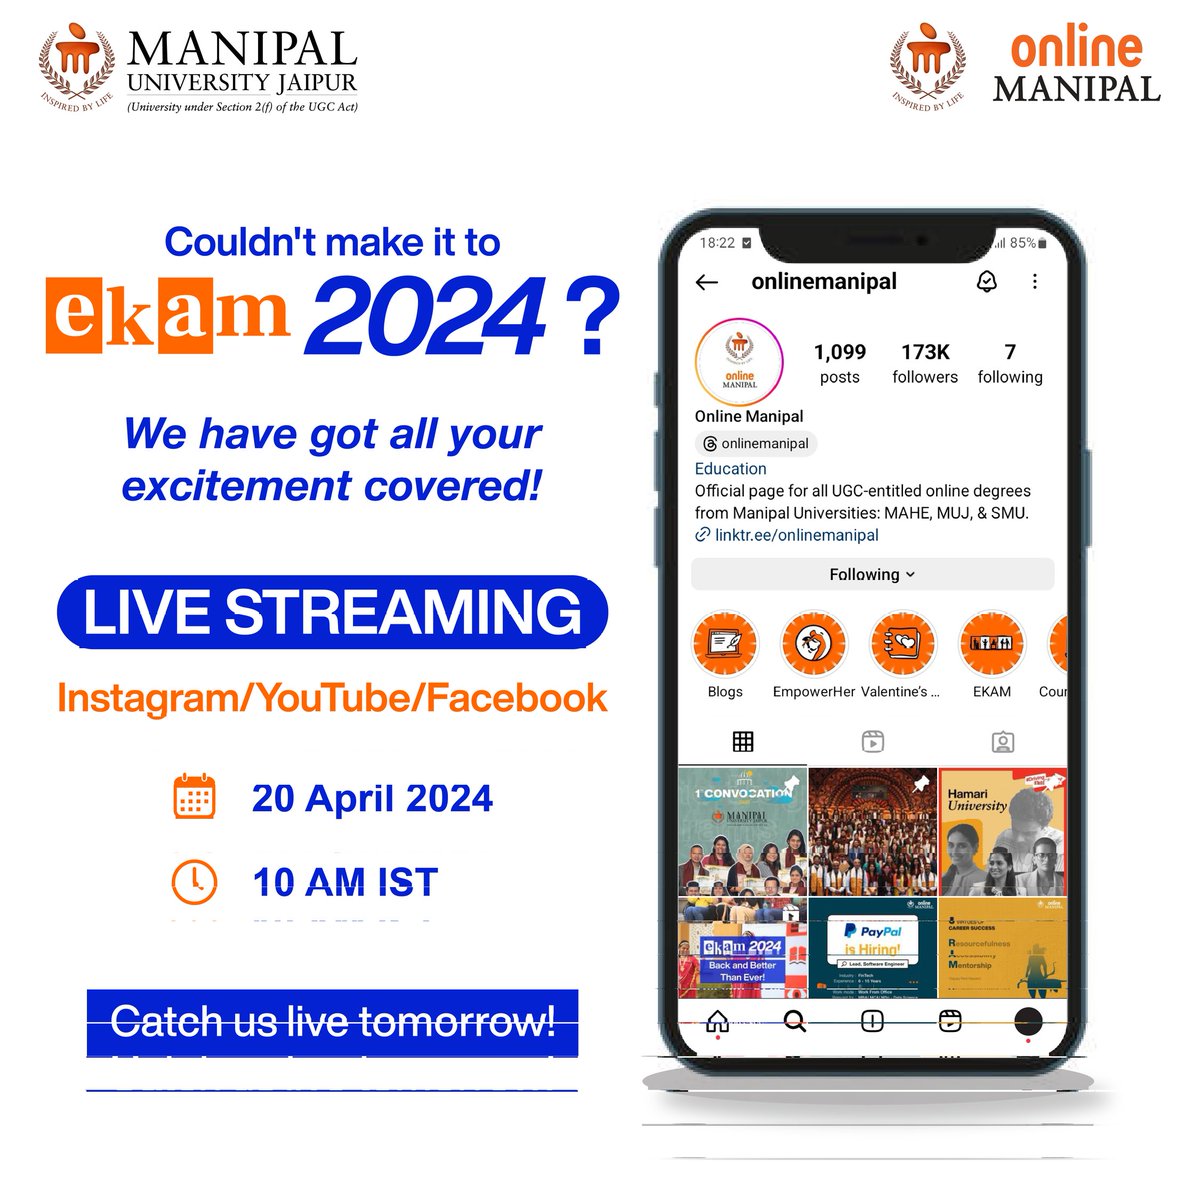 FOMO? Not anymore! We’re going live on INSTAGRAM, Facebook, and YOUTUBE so our students don't miss out on the fun!
Tune in 

⏰ at 10 AM 
📆 tomorrow, 20th April 2024

#EKAM2024 #OfflineMeetup #EKAM
#ManipalUniversityJaipur #MeetandGreet #MUJ
#OnlineLearnersMeetup #OnlineDegrees